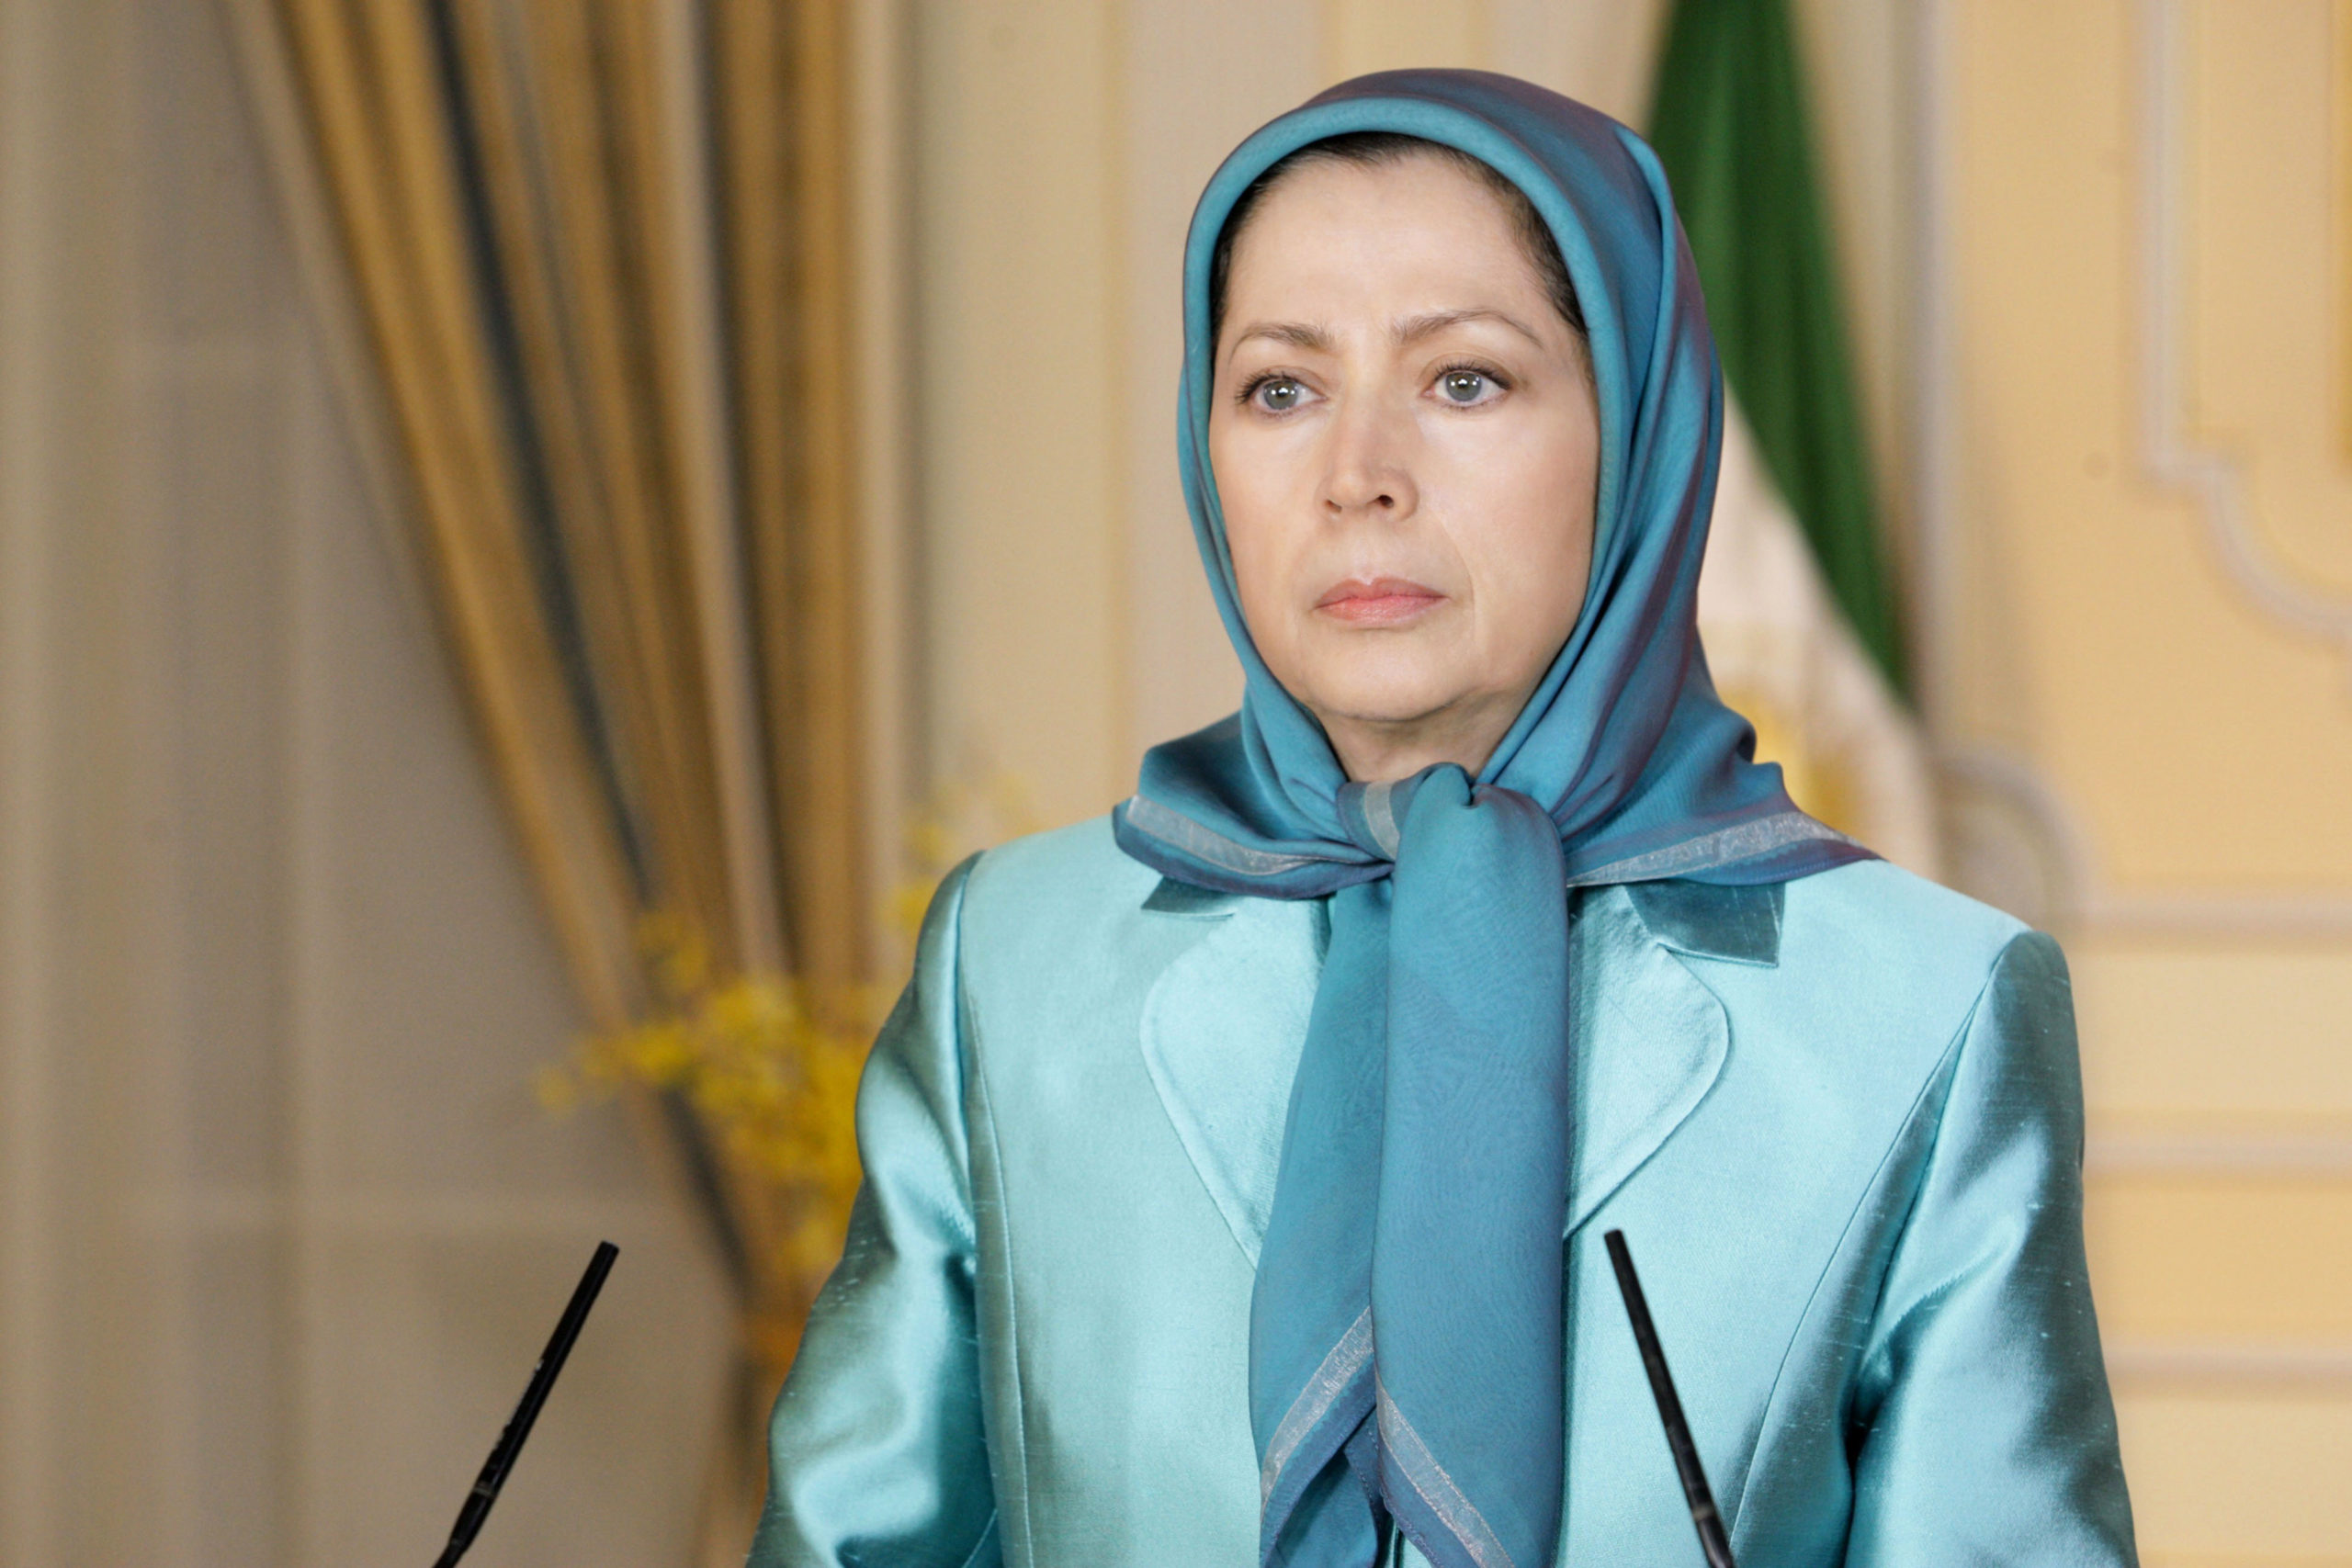 Maryam Rajavi: Once again Khamenei demonstrated the clerical regime's deadly impasse, disregard for the people's lives, and concern to keep power...